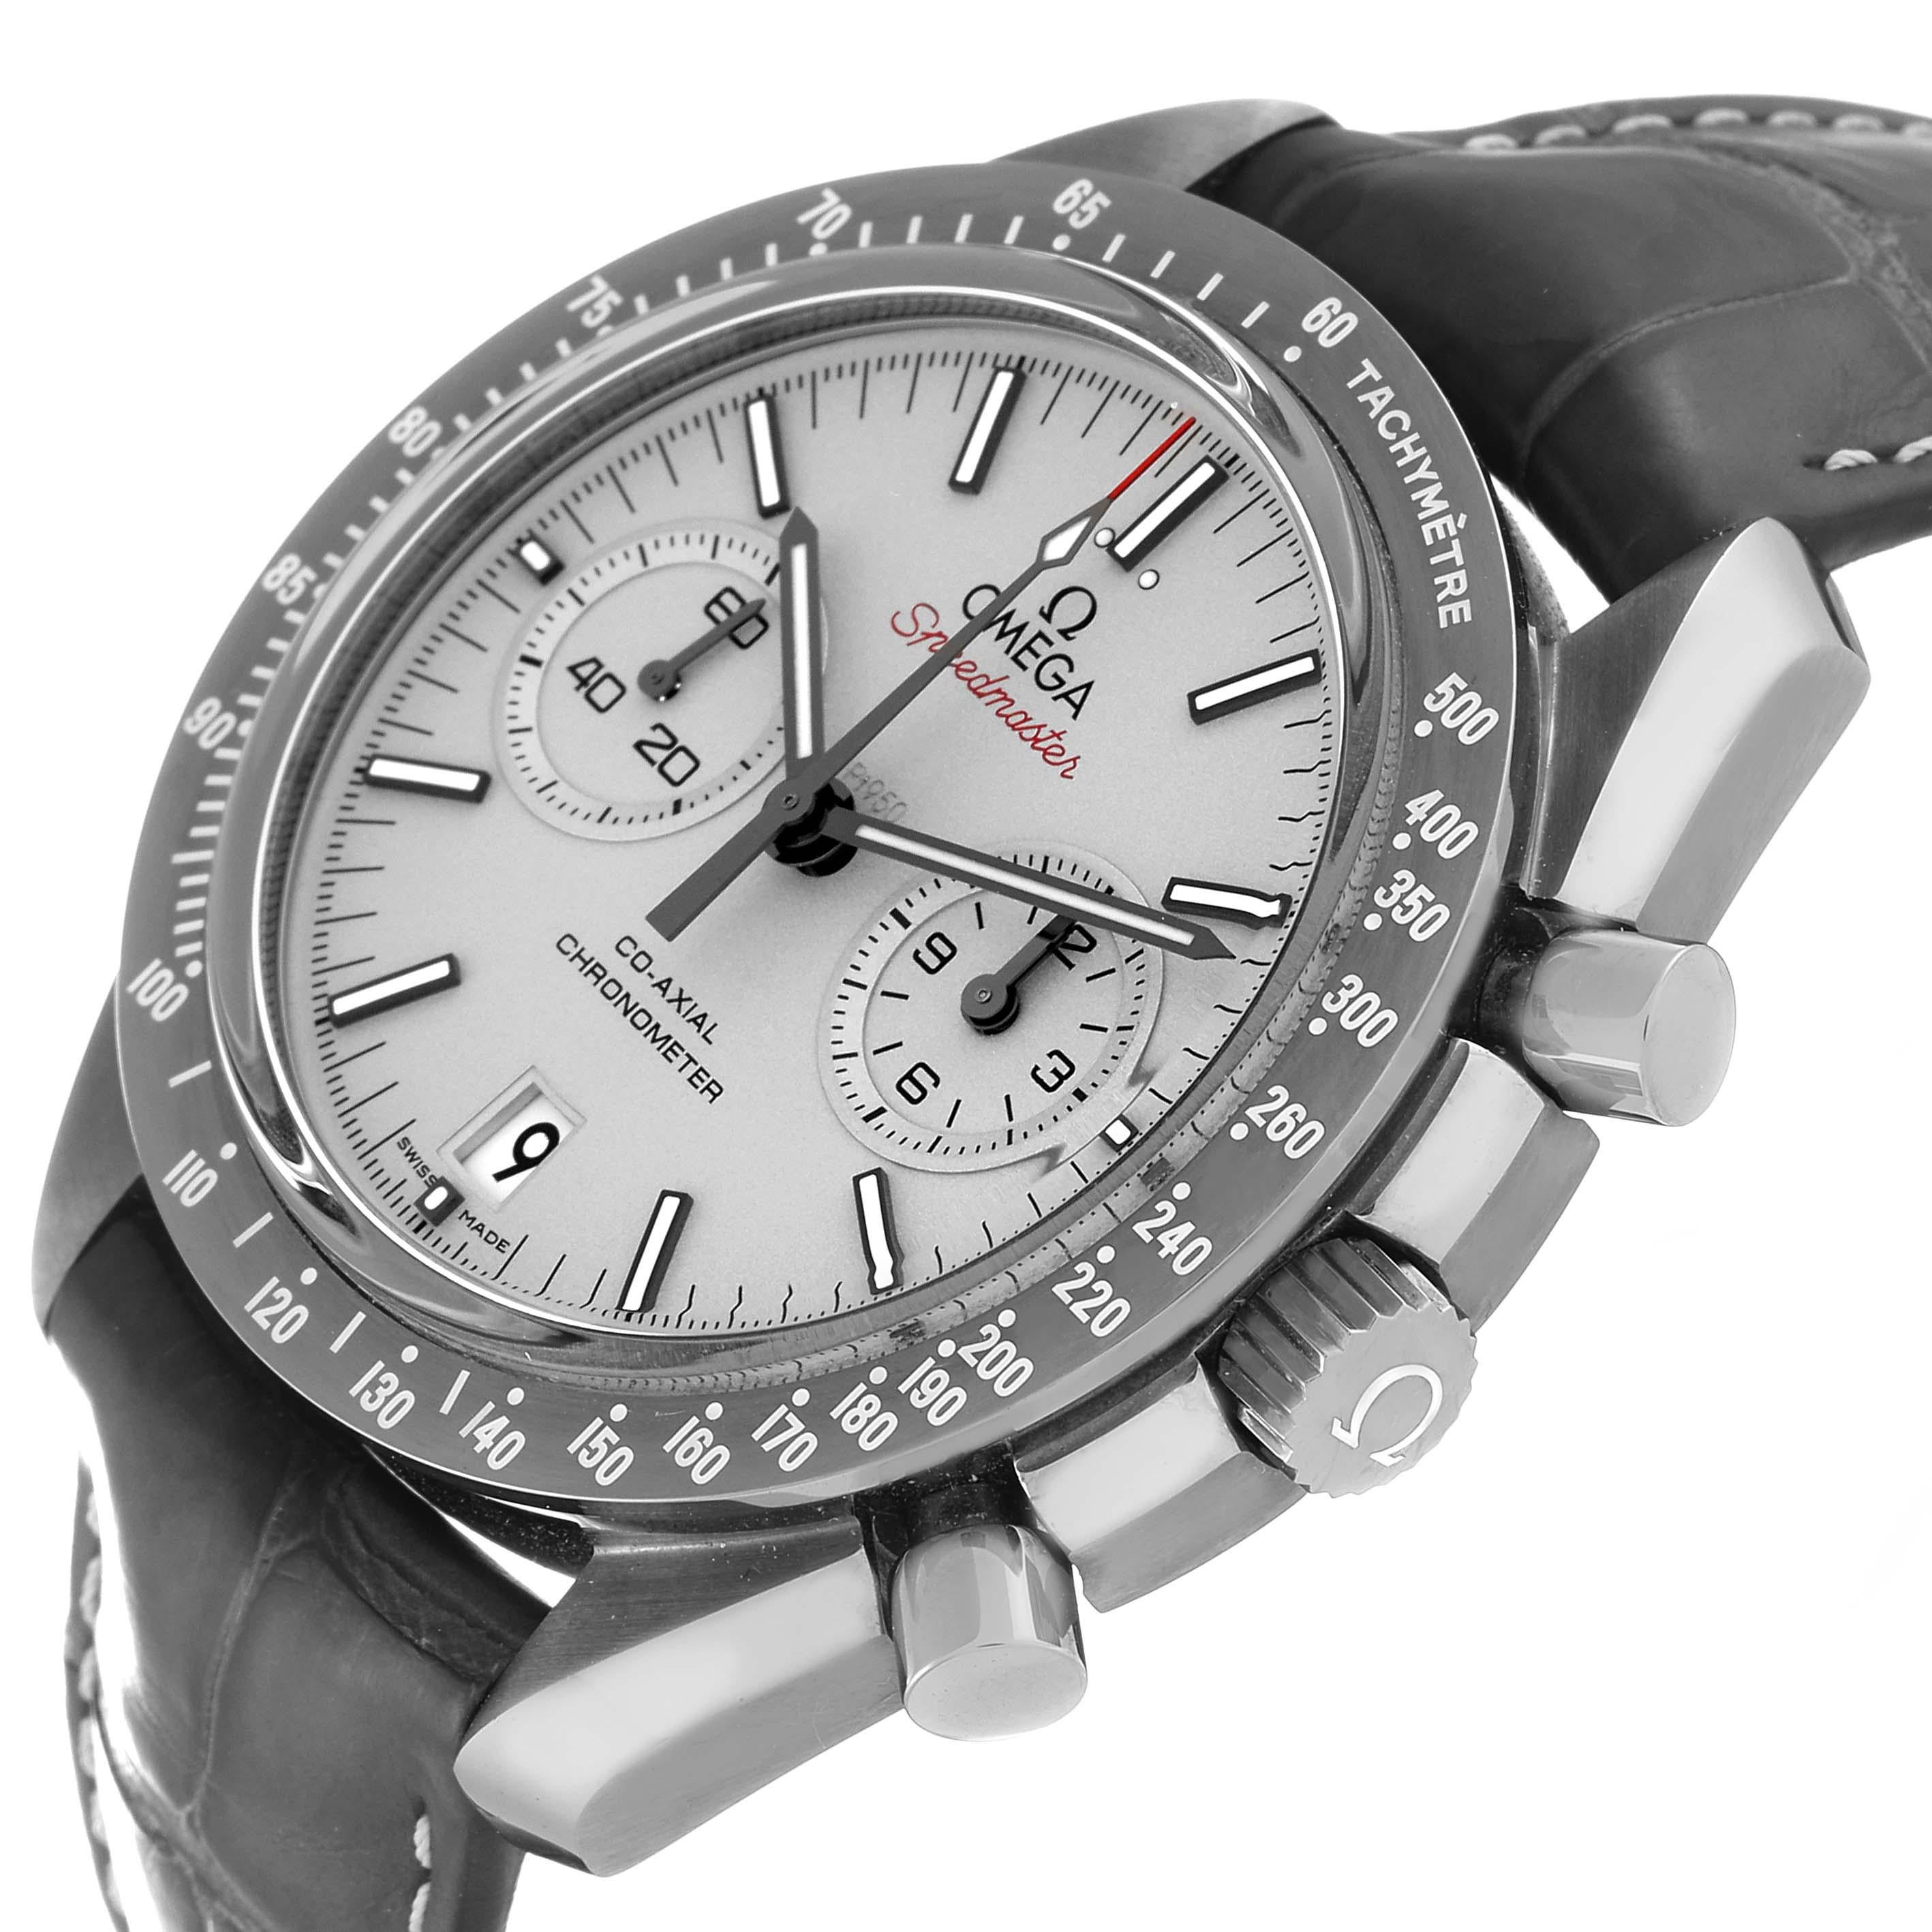 Omega Speedmaster Grey Side of the Moon Ceramic Mens Watch 311.93.44.51.99.001 For Sale 2